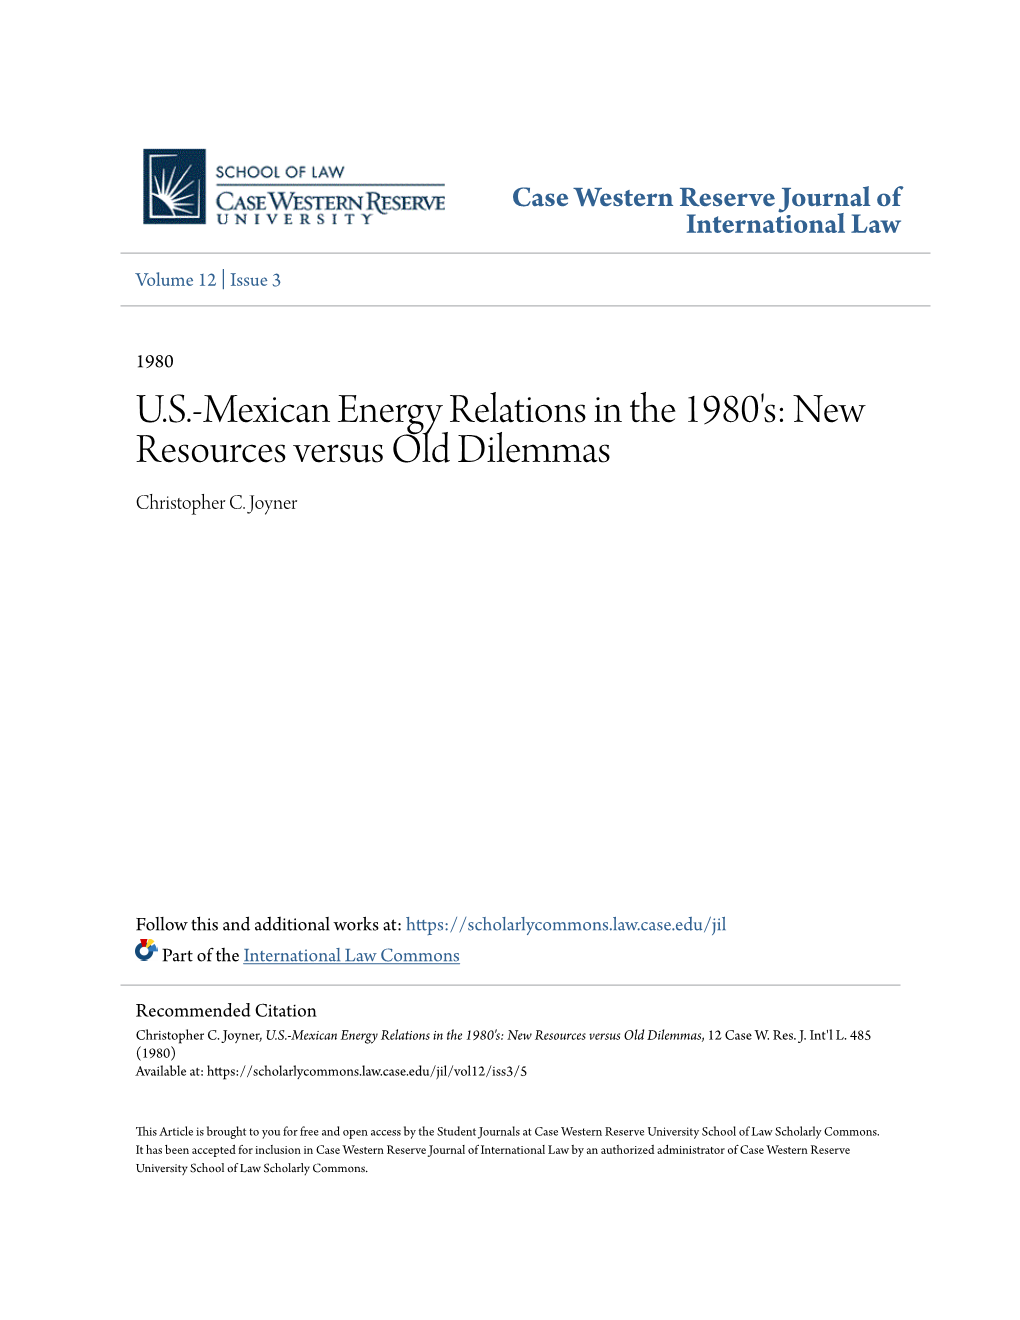 US-Mexican Energy Relations in the 1980'S